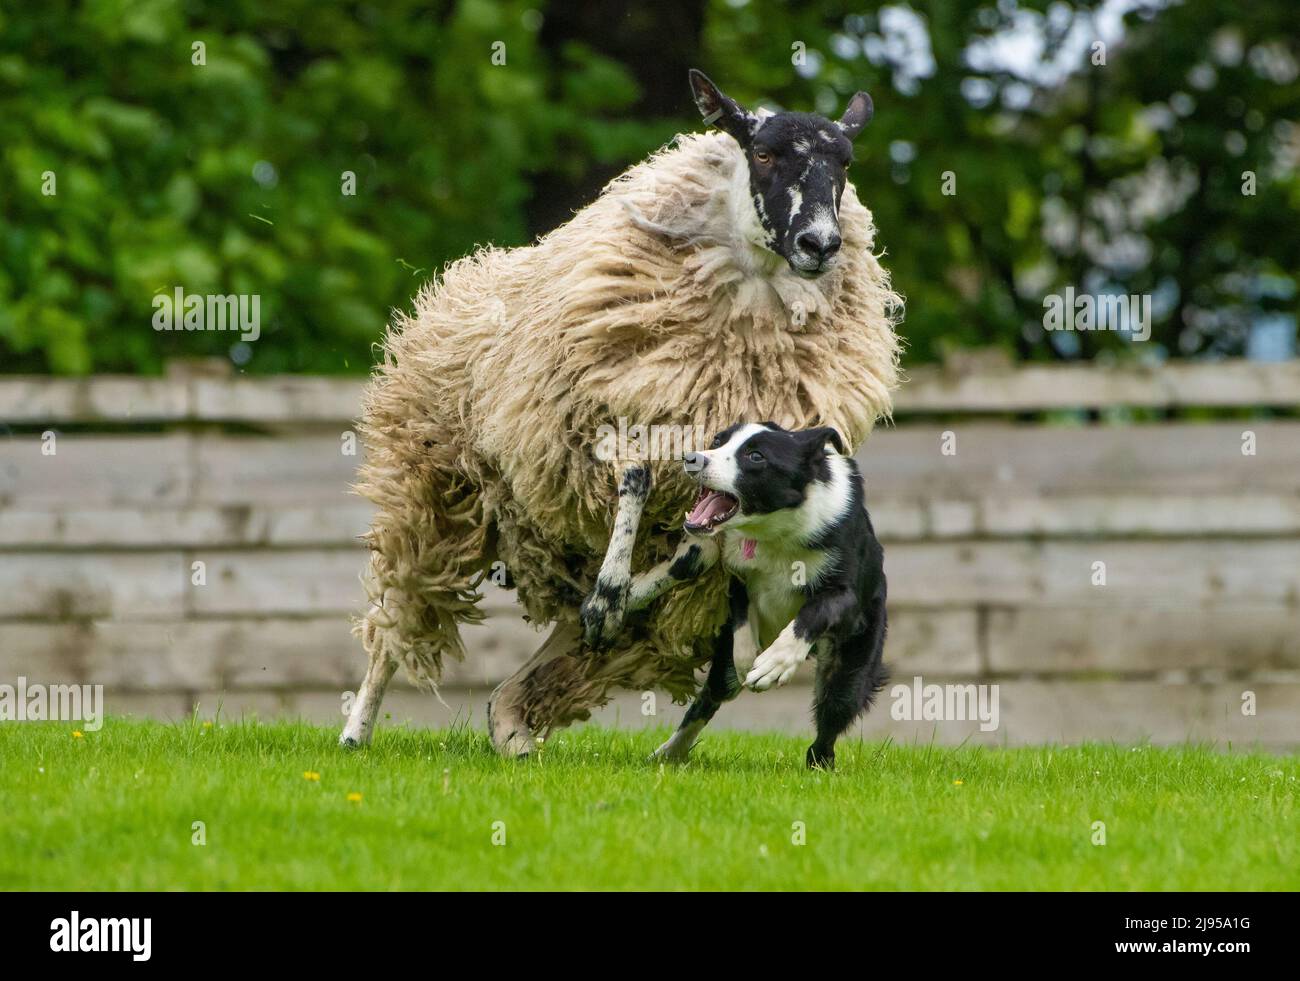 Skipton, North Yorkshire, UK. 20th May, 2022. An overenthusiastic sheepdog at the Spring Sale of Sheepdogs held at Skipton, North Yorkshire, UK. No harm came to sheep or dog. Credit: John Eveson/Alamy Live News Stock Photo